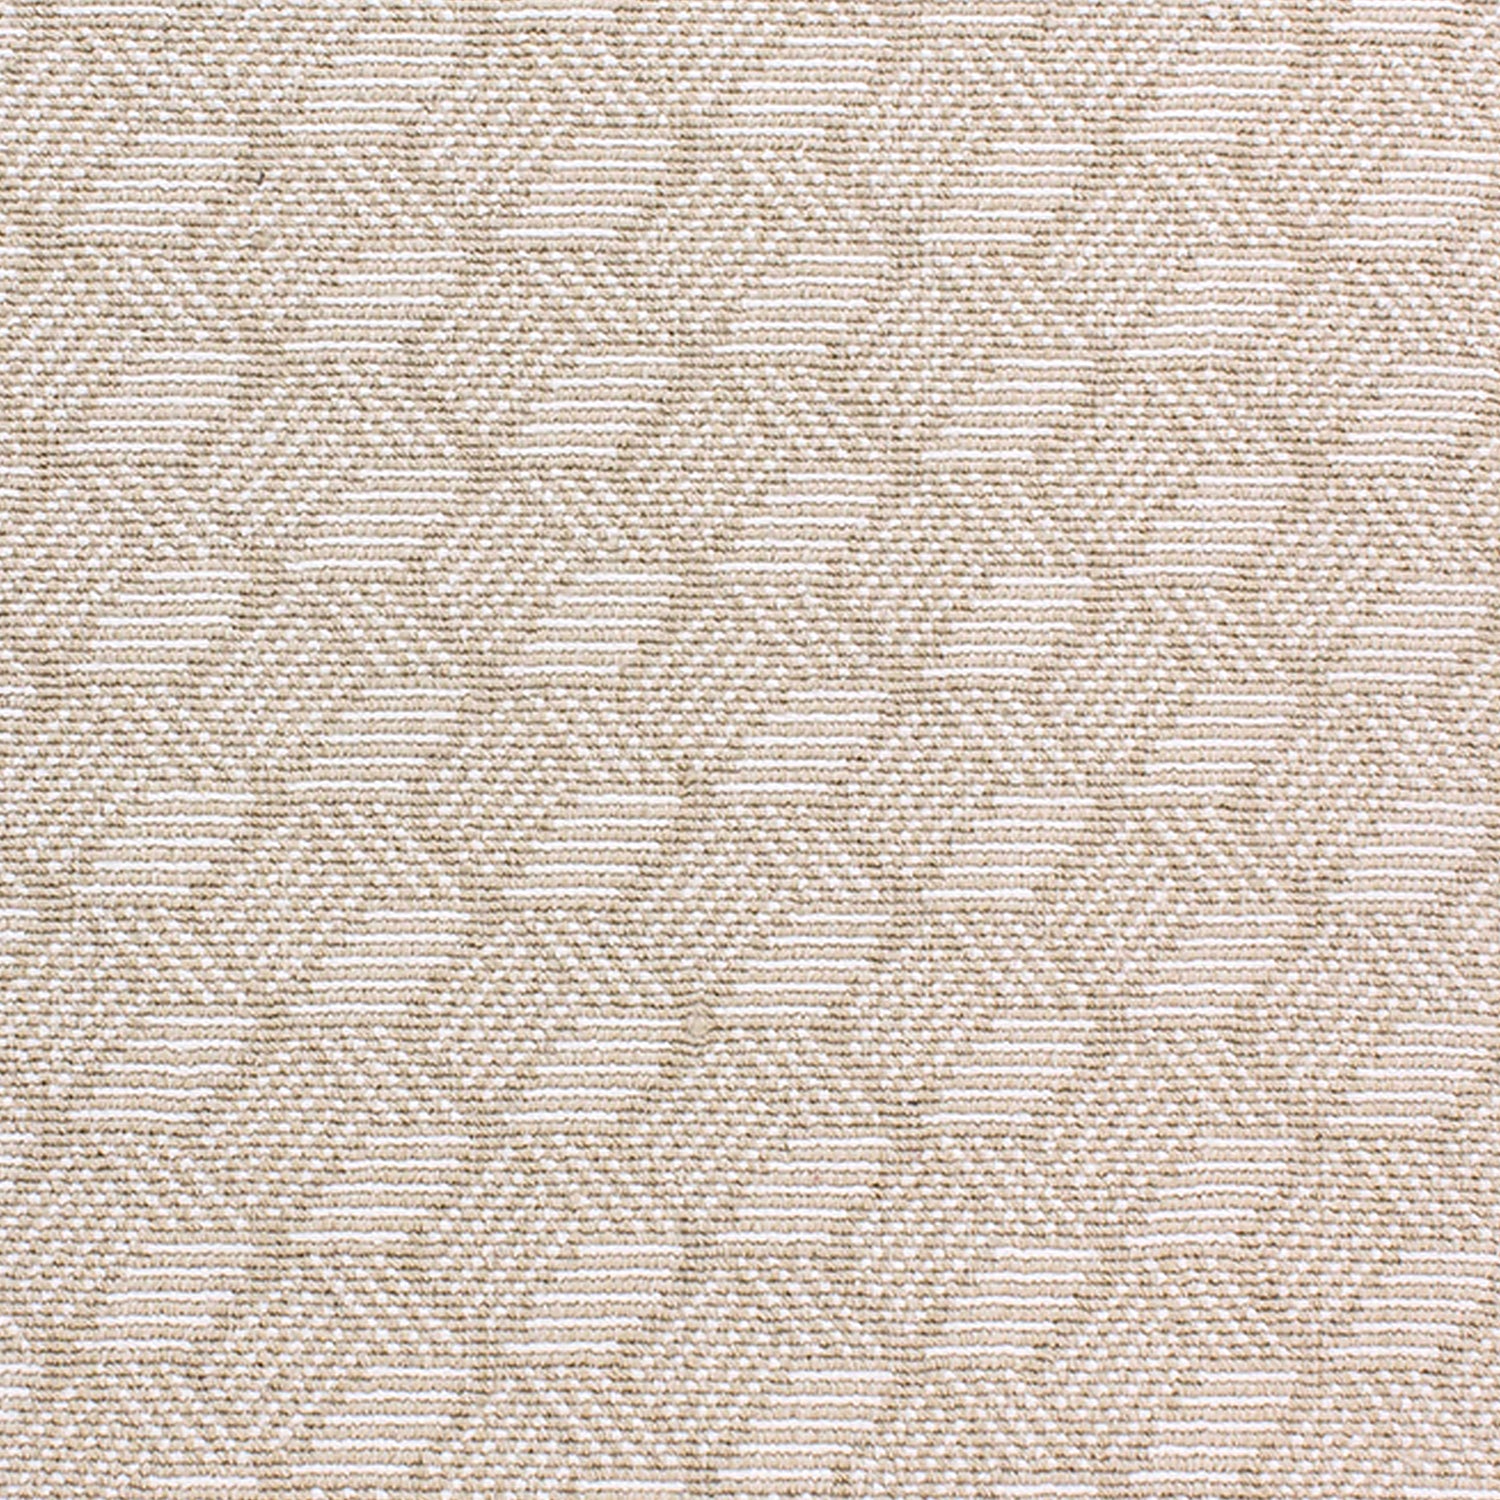 Wool-blend broadloom carpet swatch in a small-scale linear geometric pattern in white and tan.